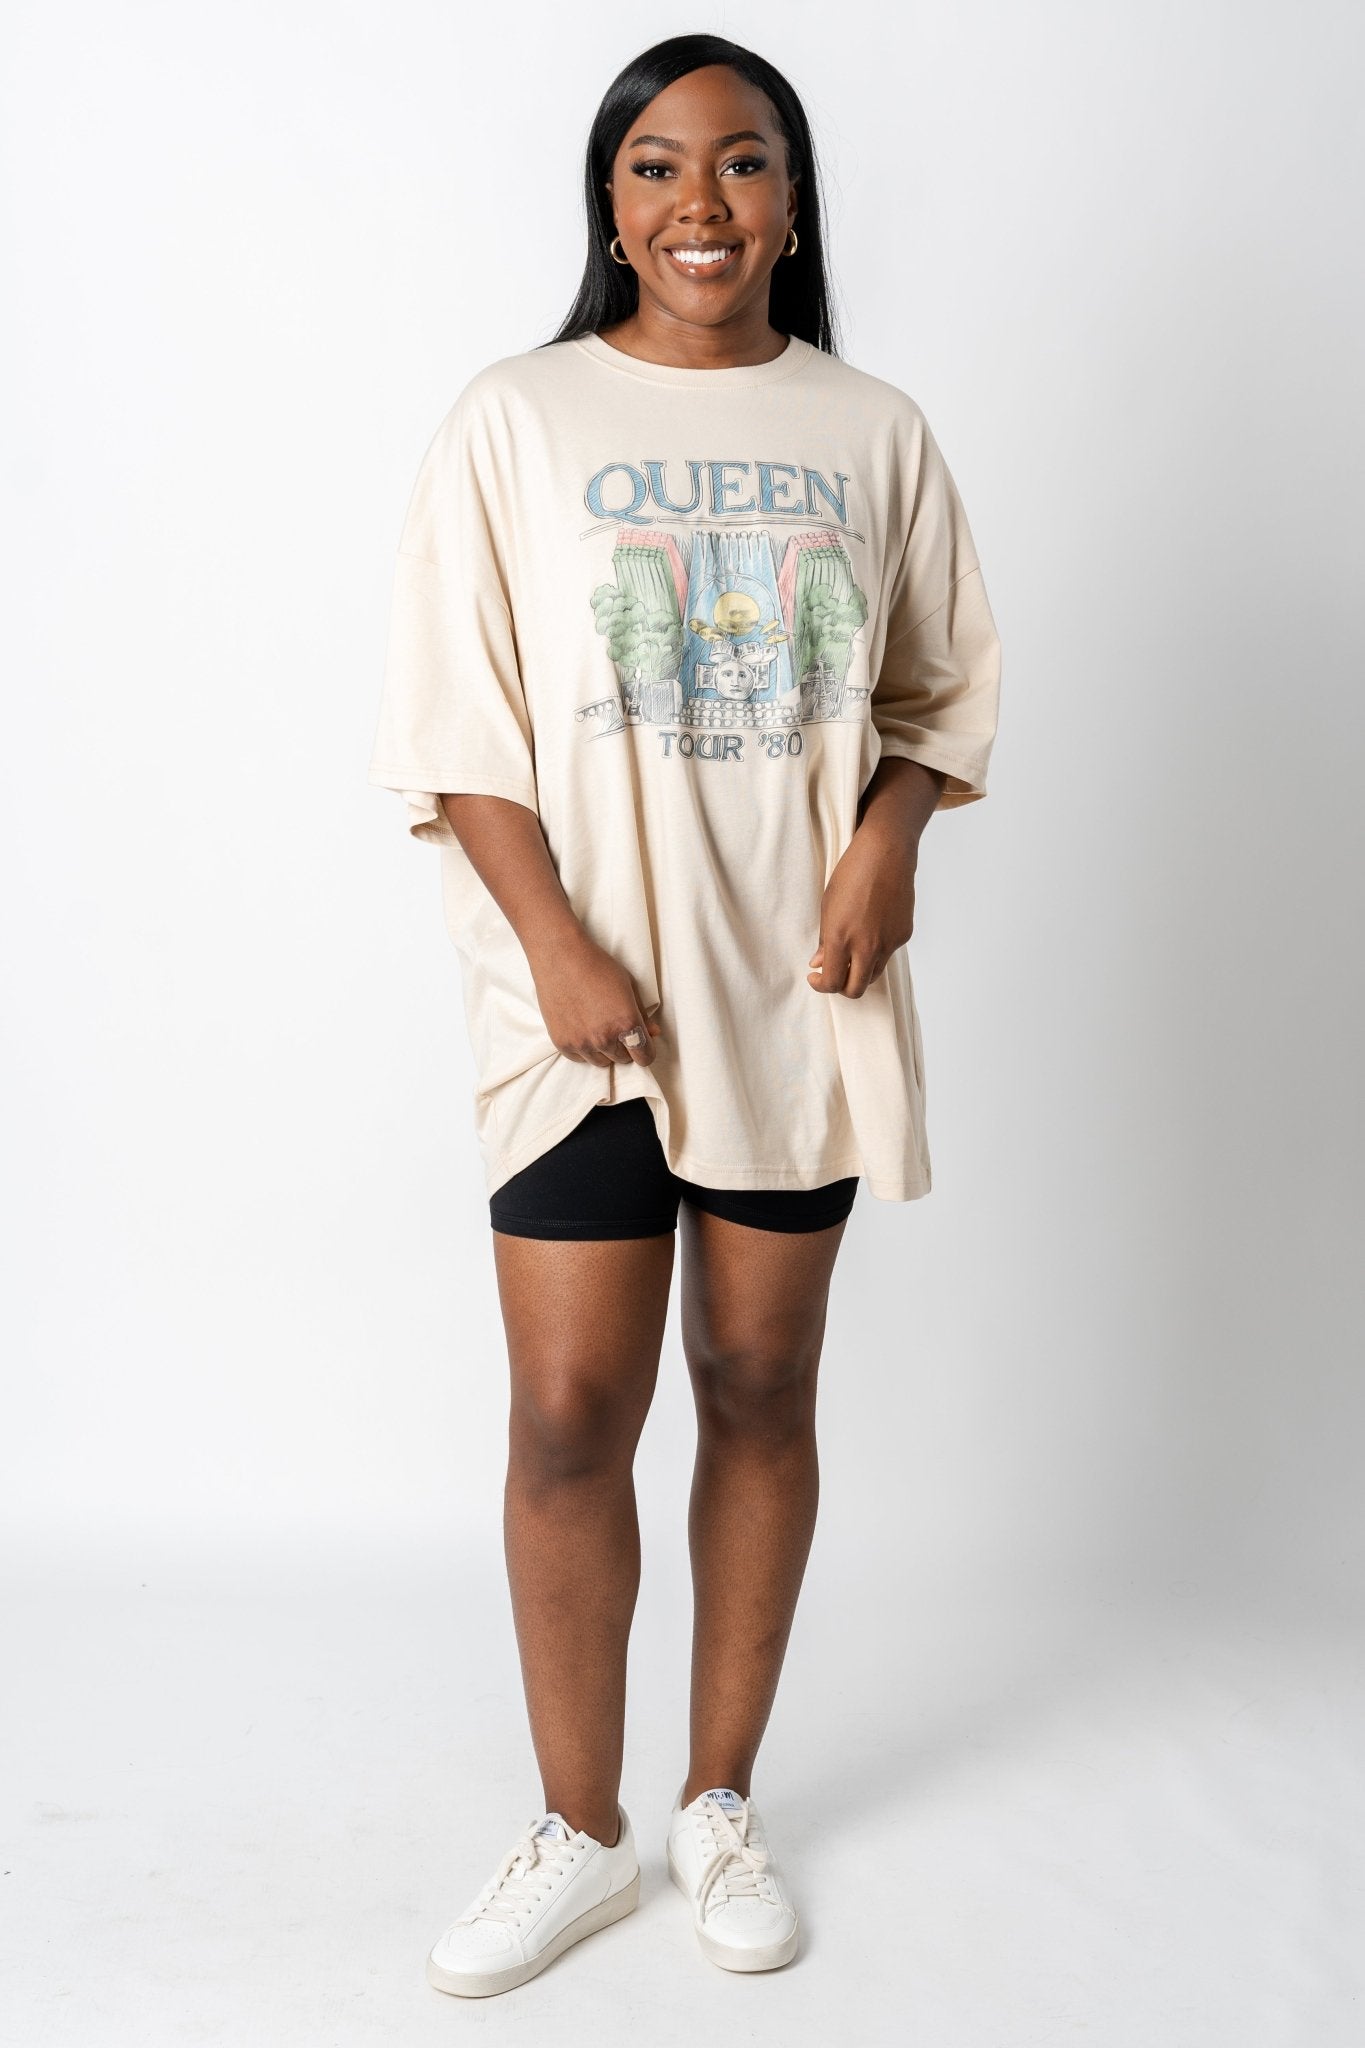 Queen 1980 tour oversized graphic tee off white - Vintage Band T-Shirts and Sweatshirts at Lush Fashion Lounge Boutique in Oklahoma City